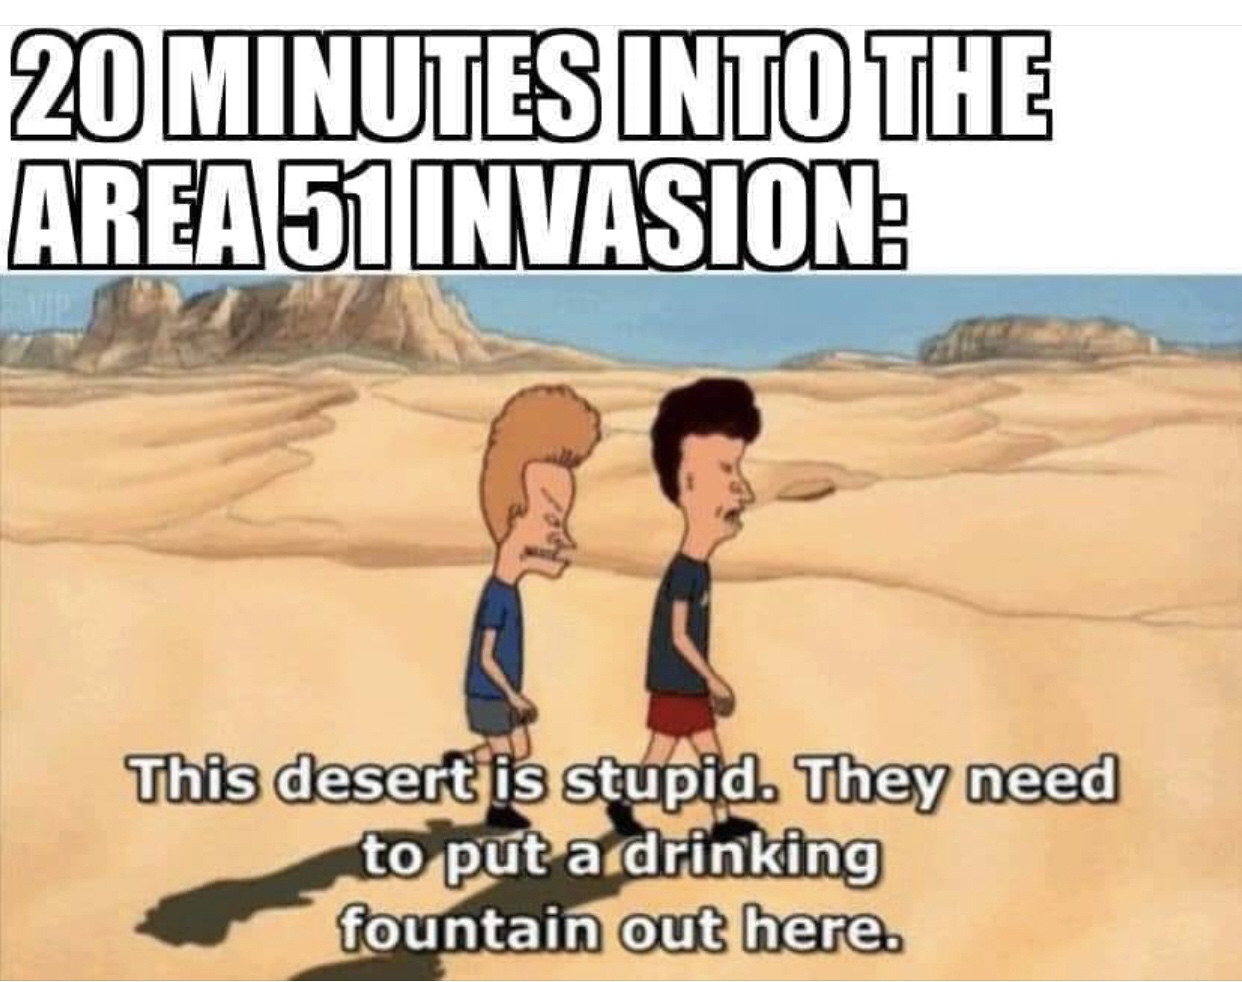 beavis and butthead memes - 20 Minutes Into The Area 51 Invasion This desert is stupid. They need to put a drinking fountain out here.